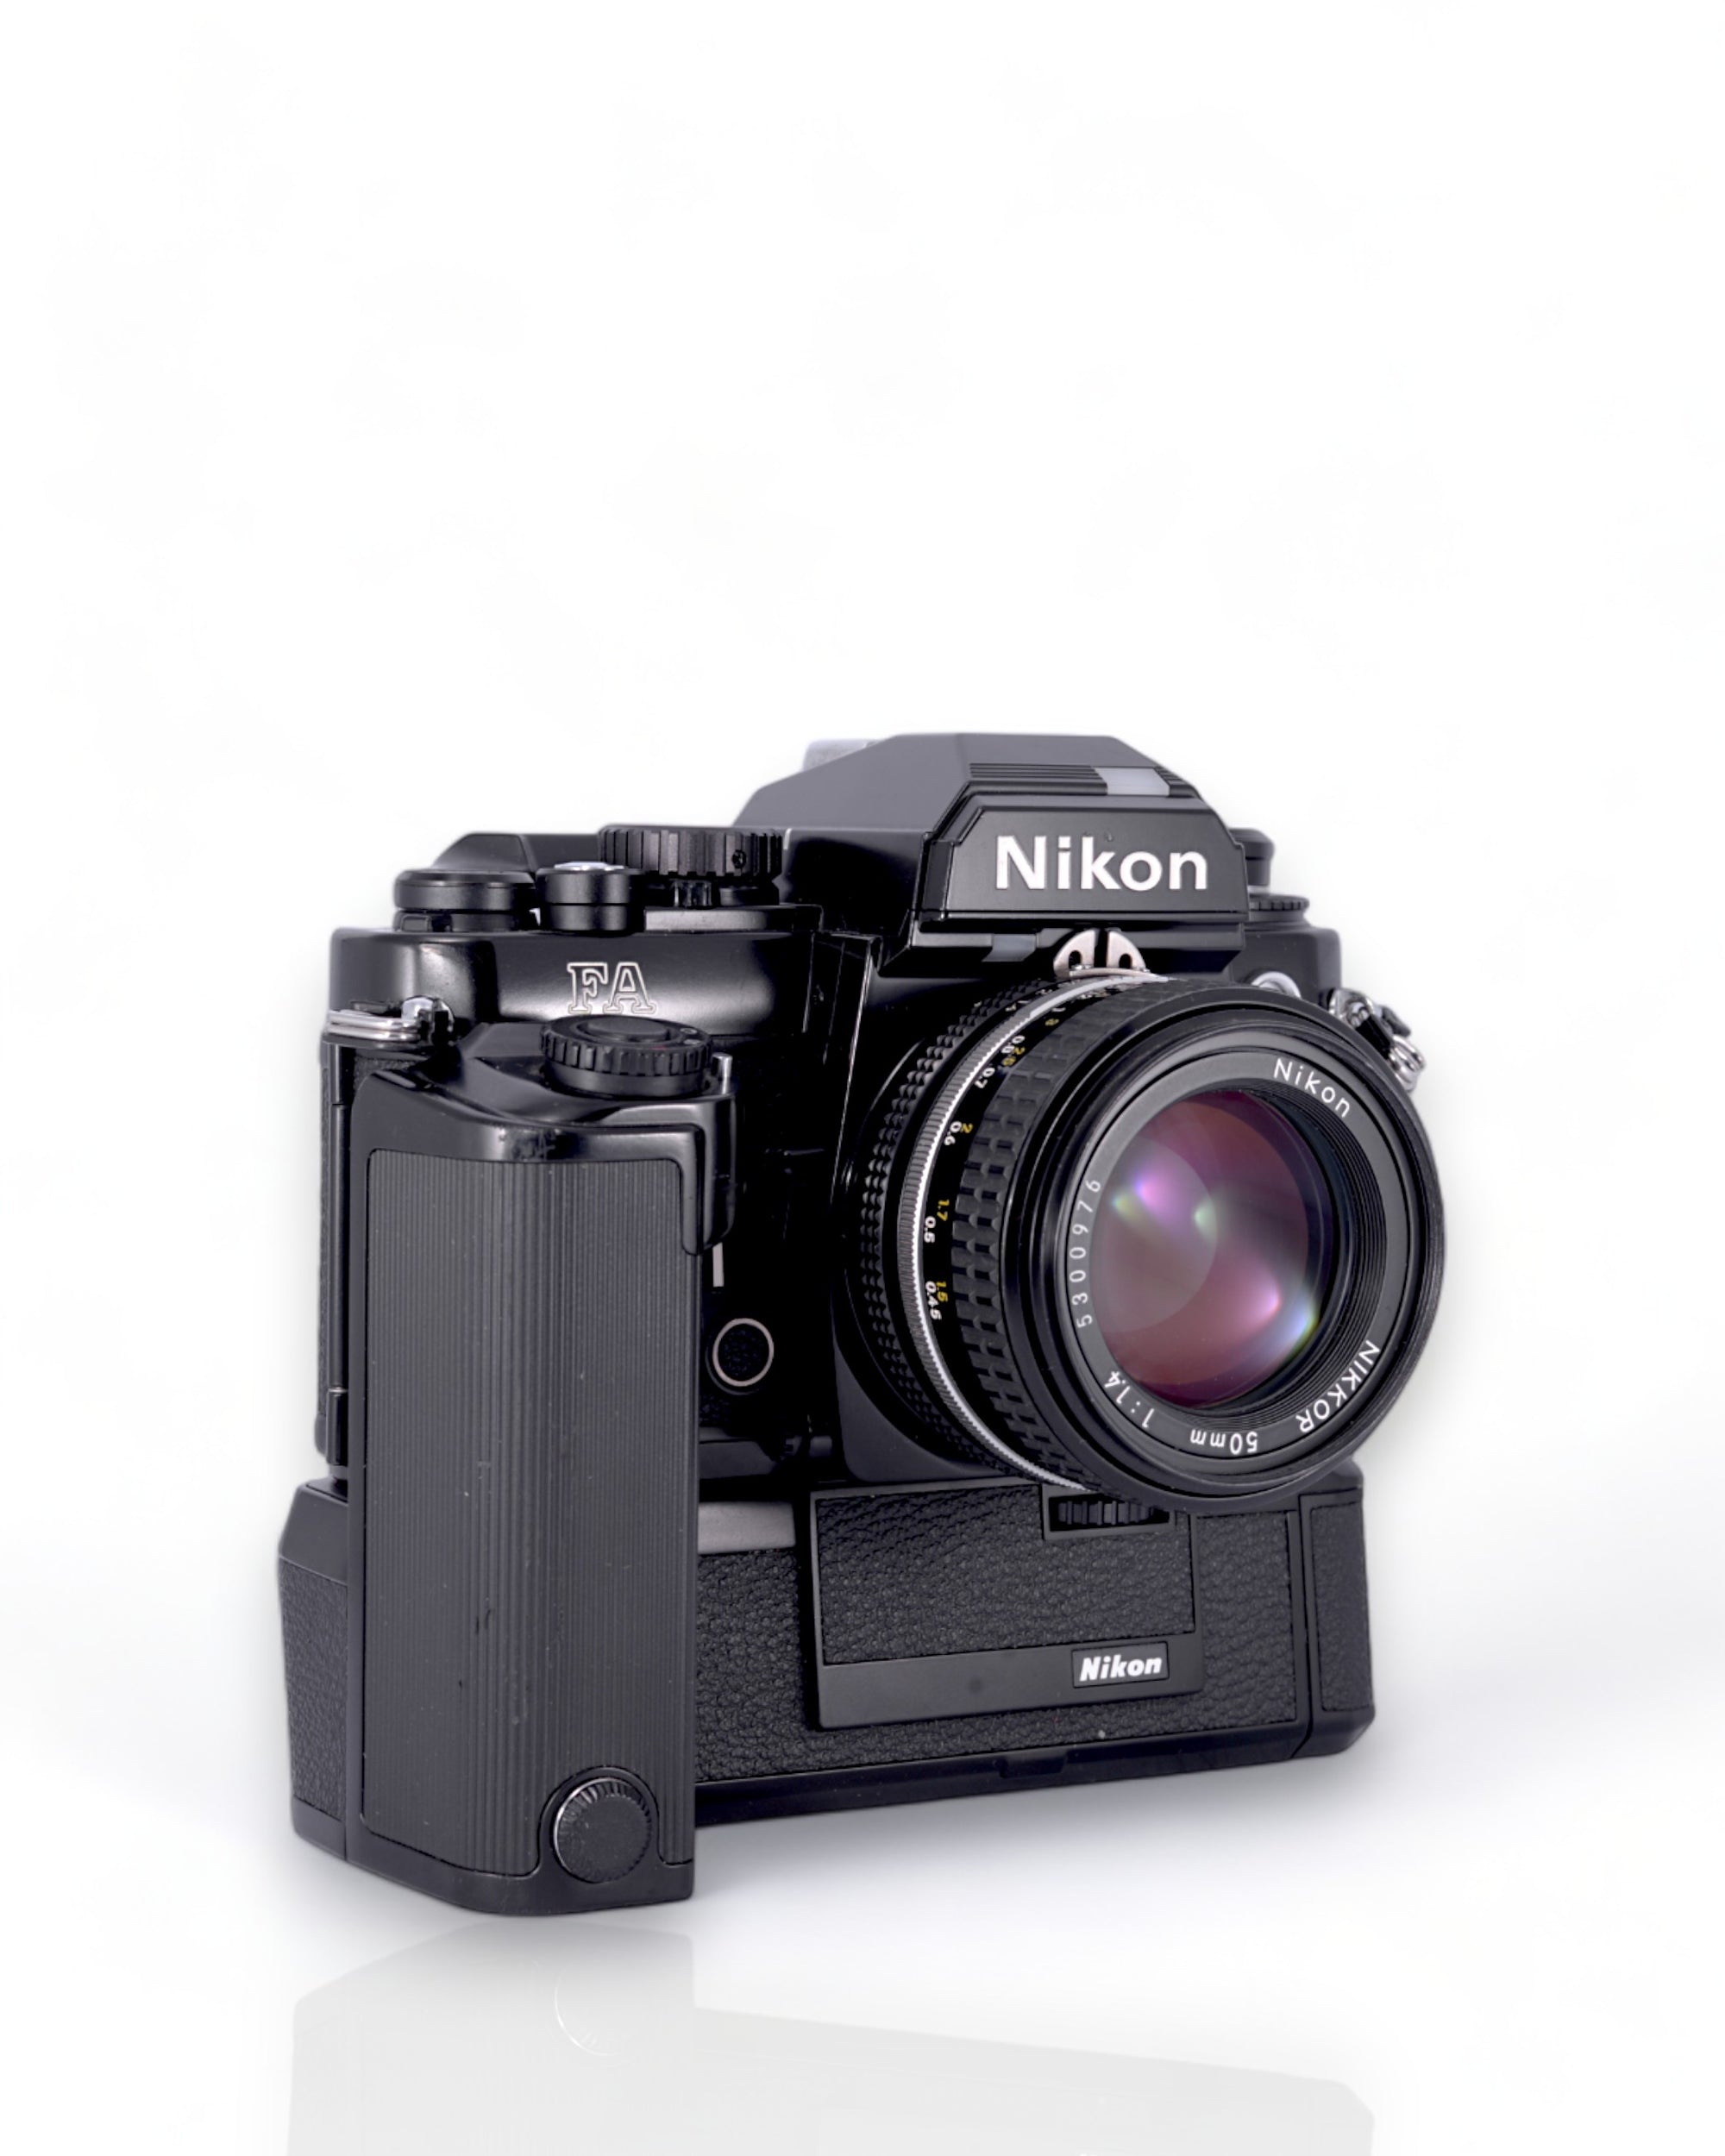 Nikon FA 35mm SLR Film Camera with motor drive and 50mm f1.4 Lens